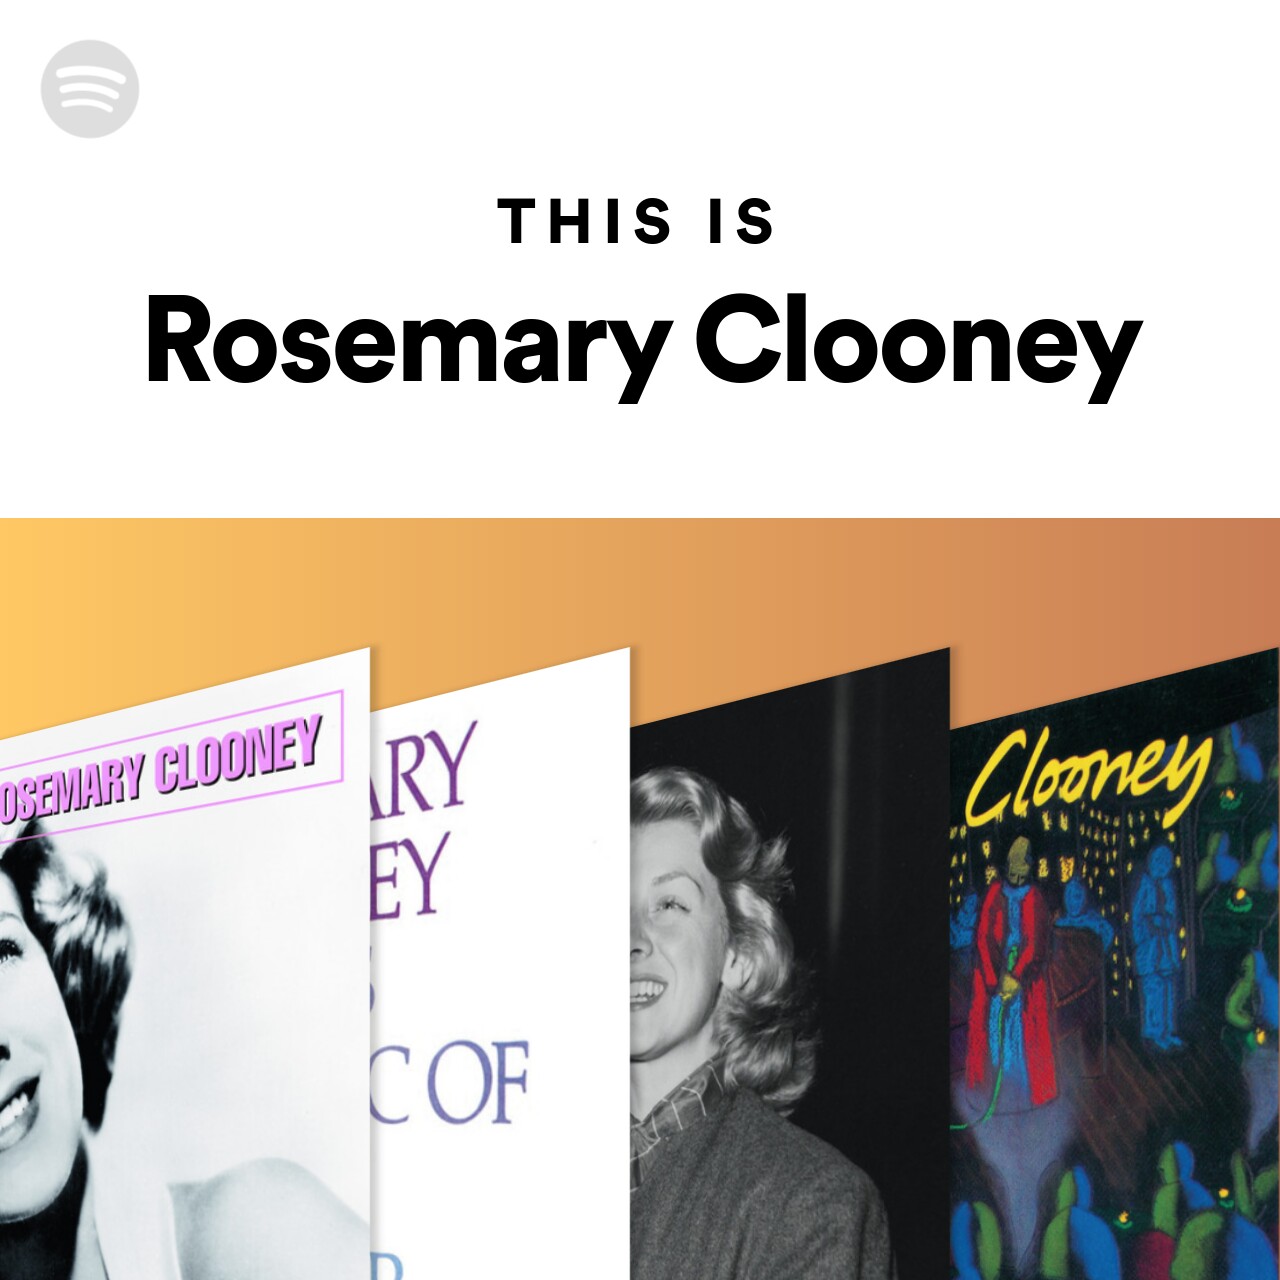 This Is Rosemary Clooney